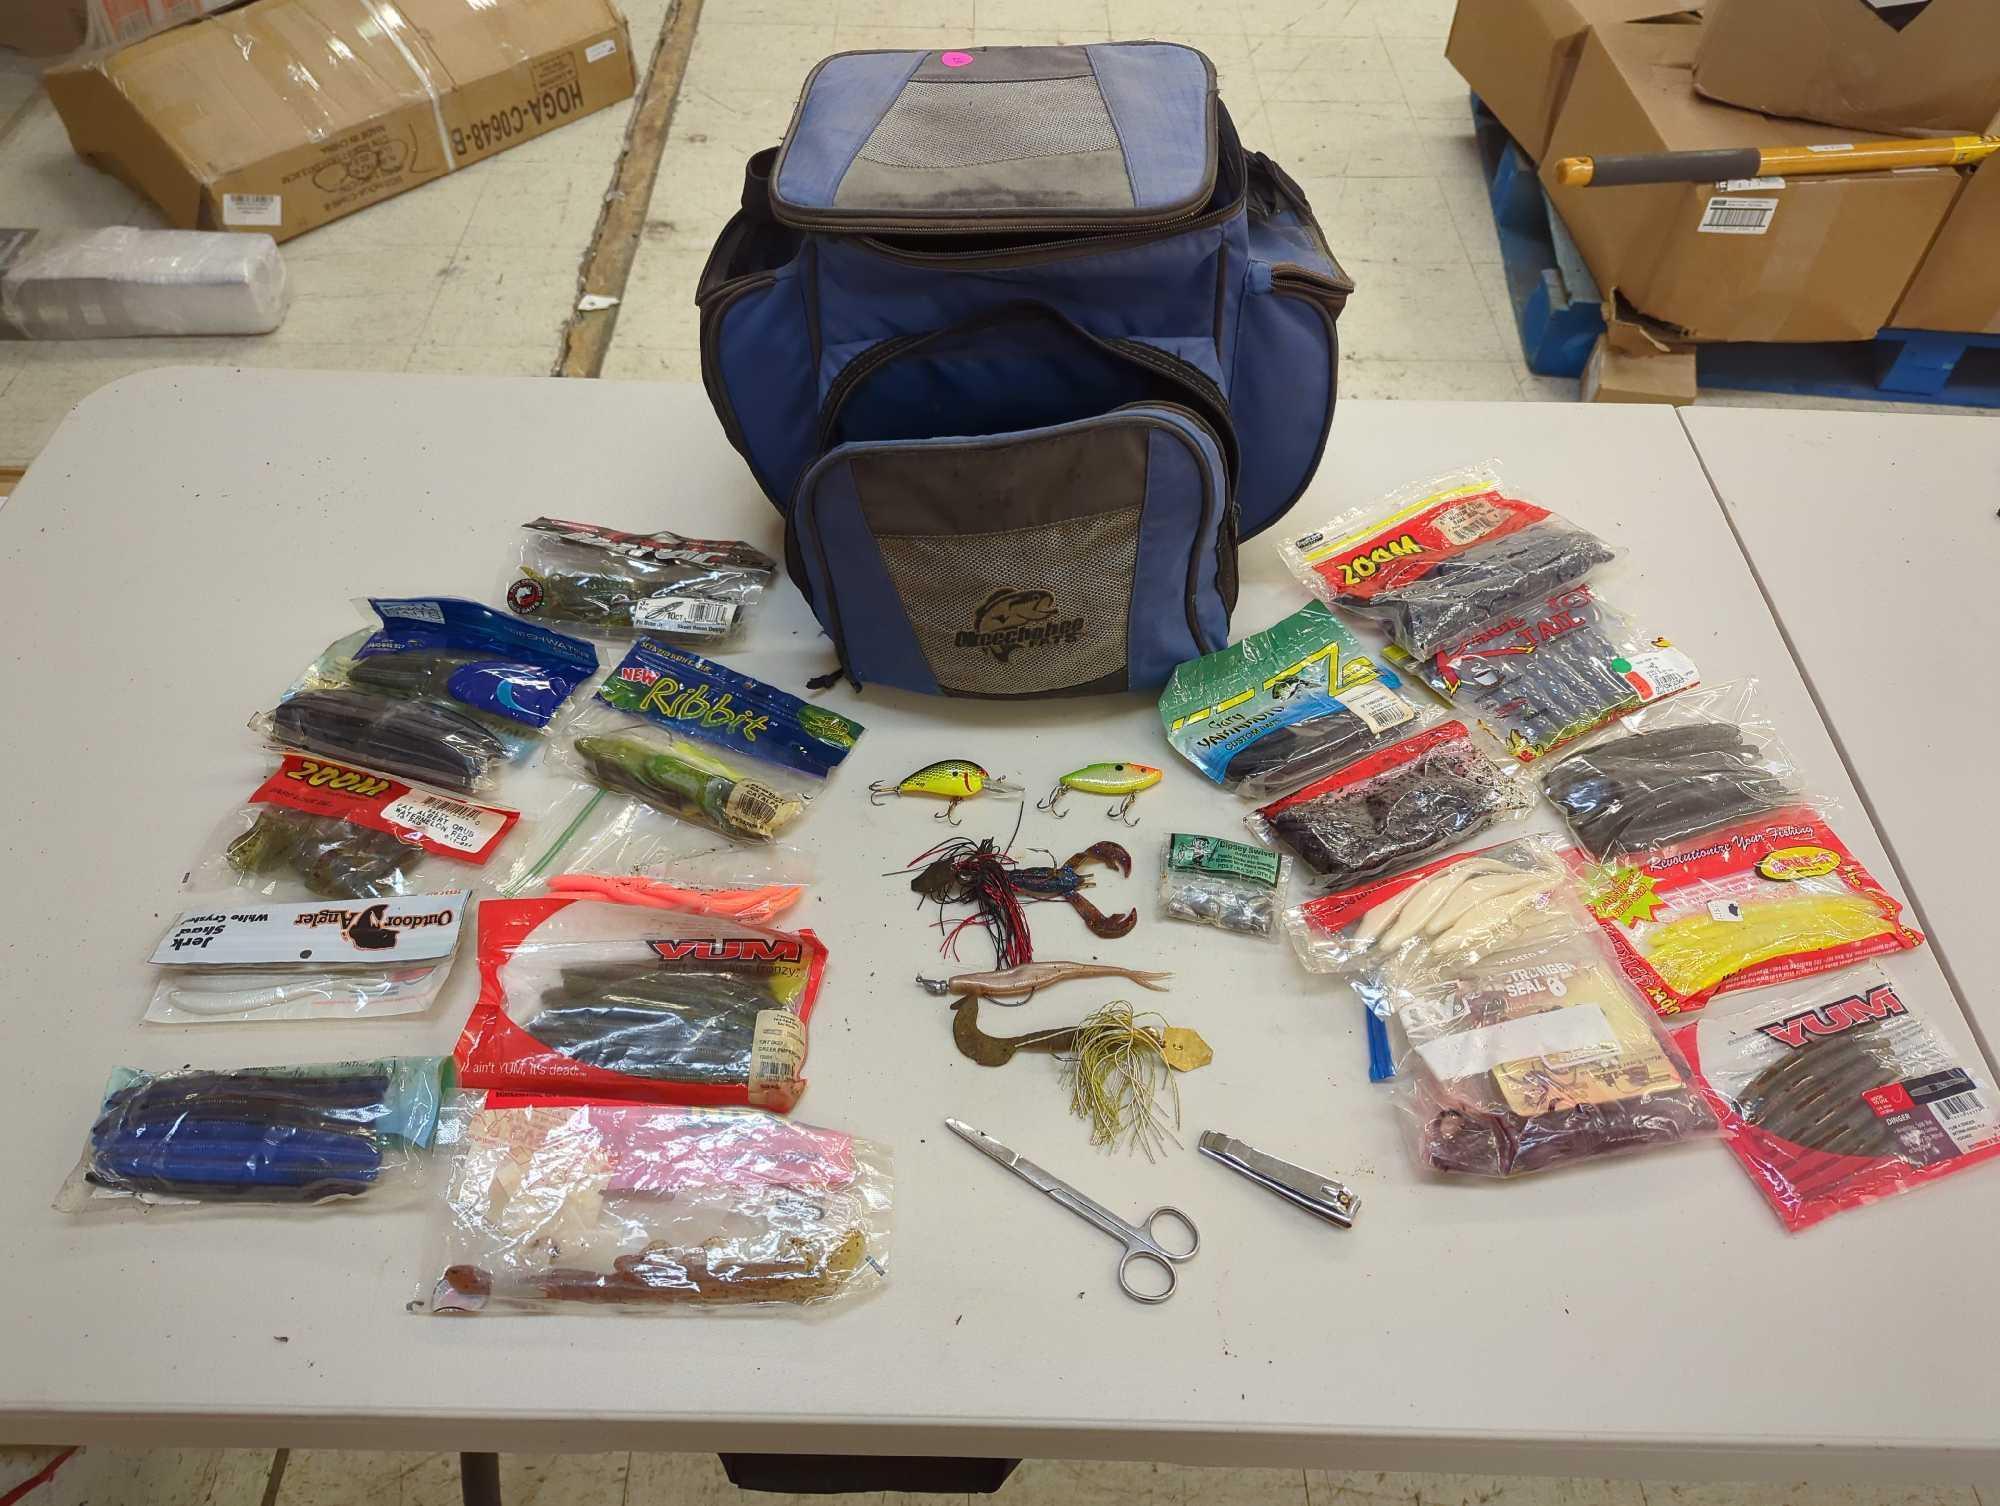 Okeechohee Fats bag and contents including various worm fishing lures and other various fishing